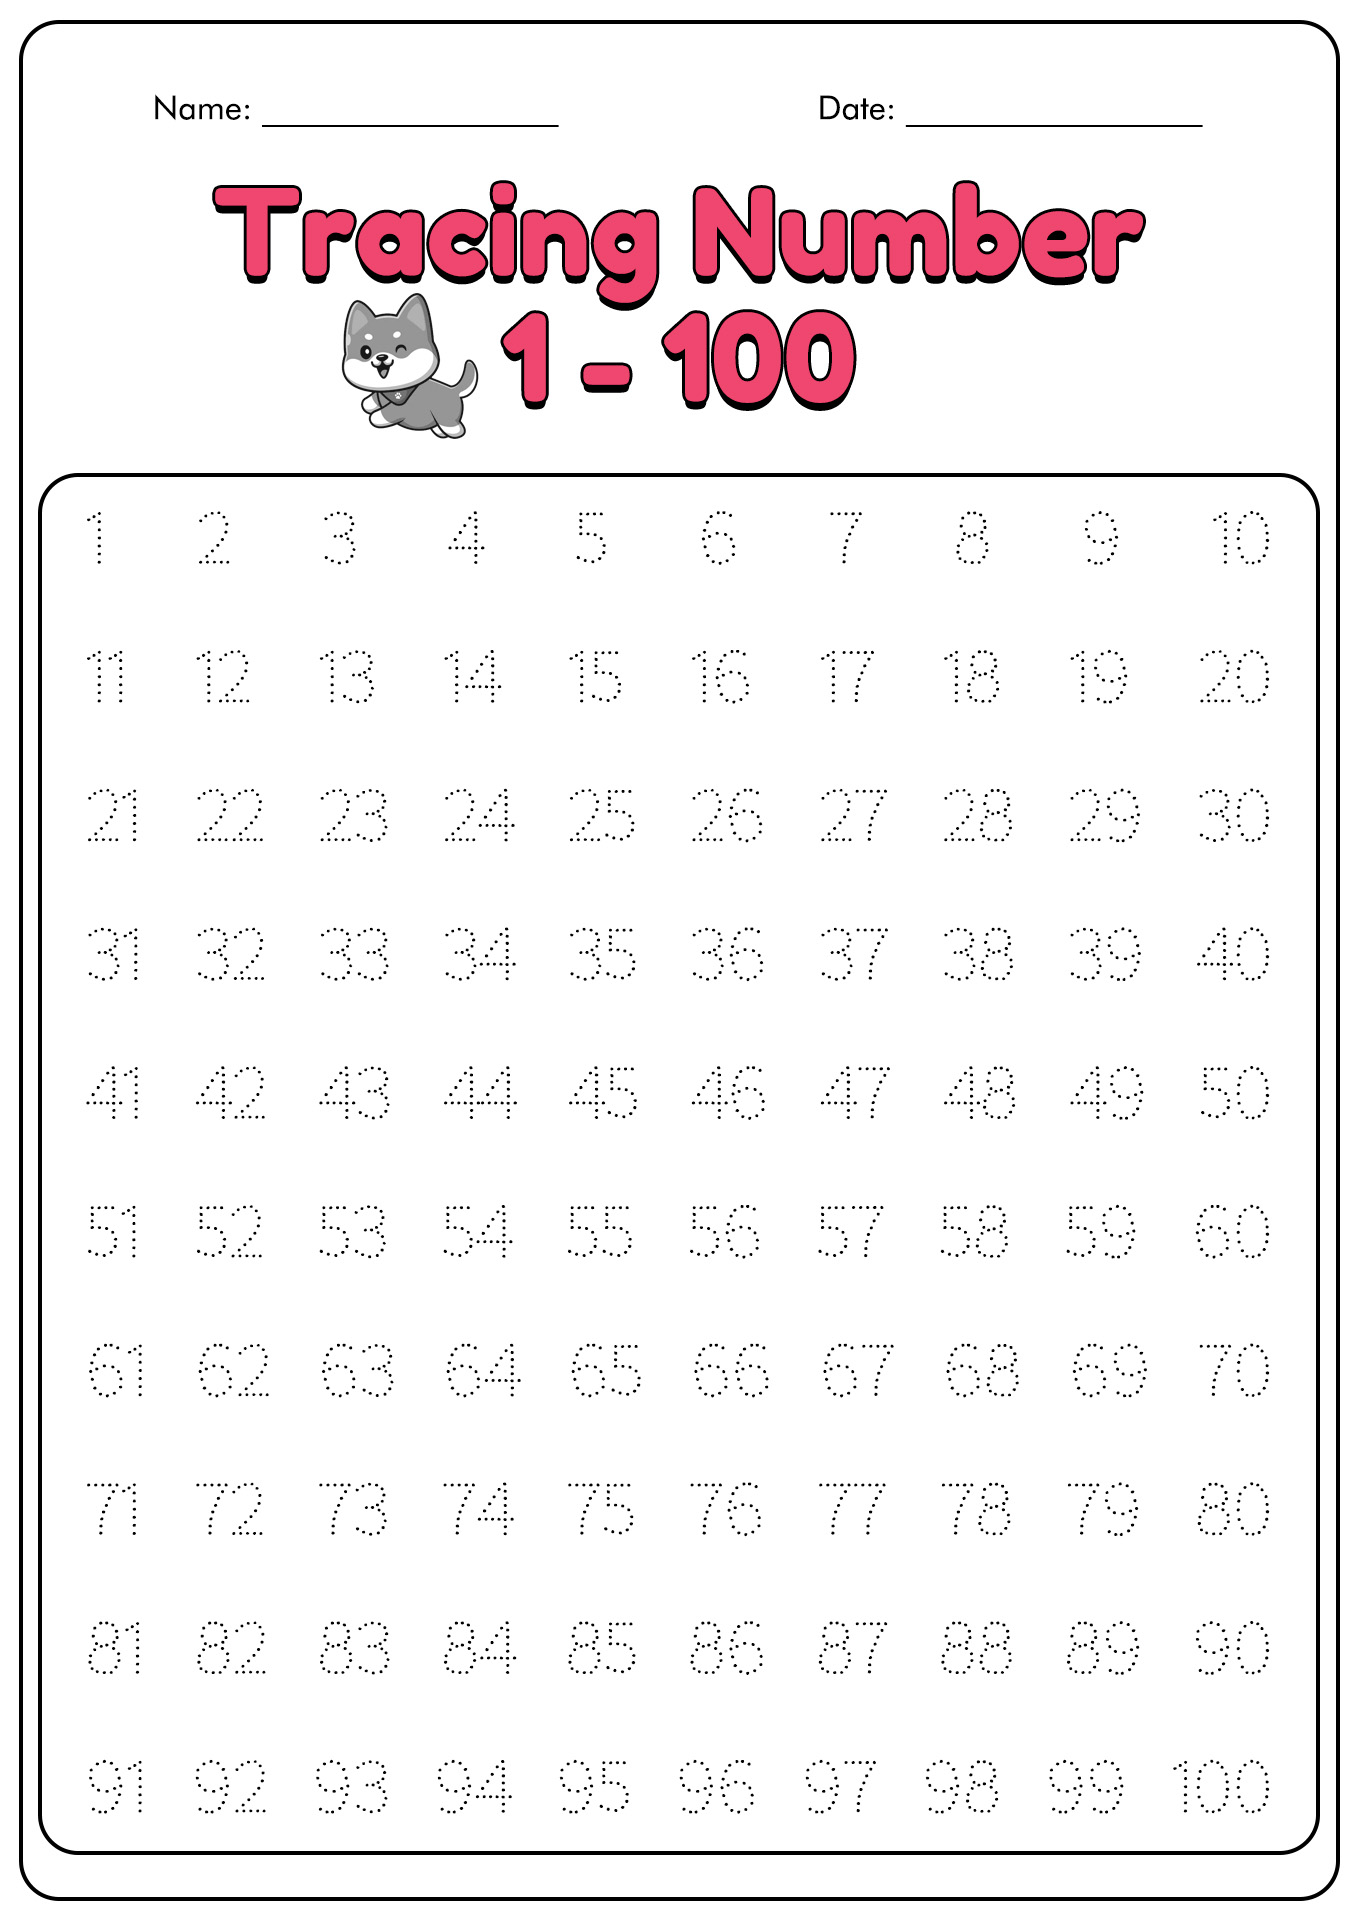 Tracing Numbers 1-100 Worksheets